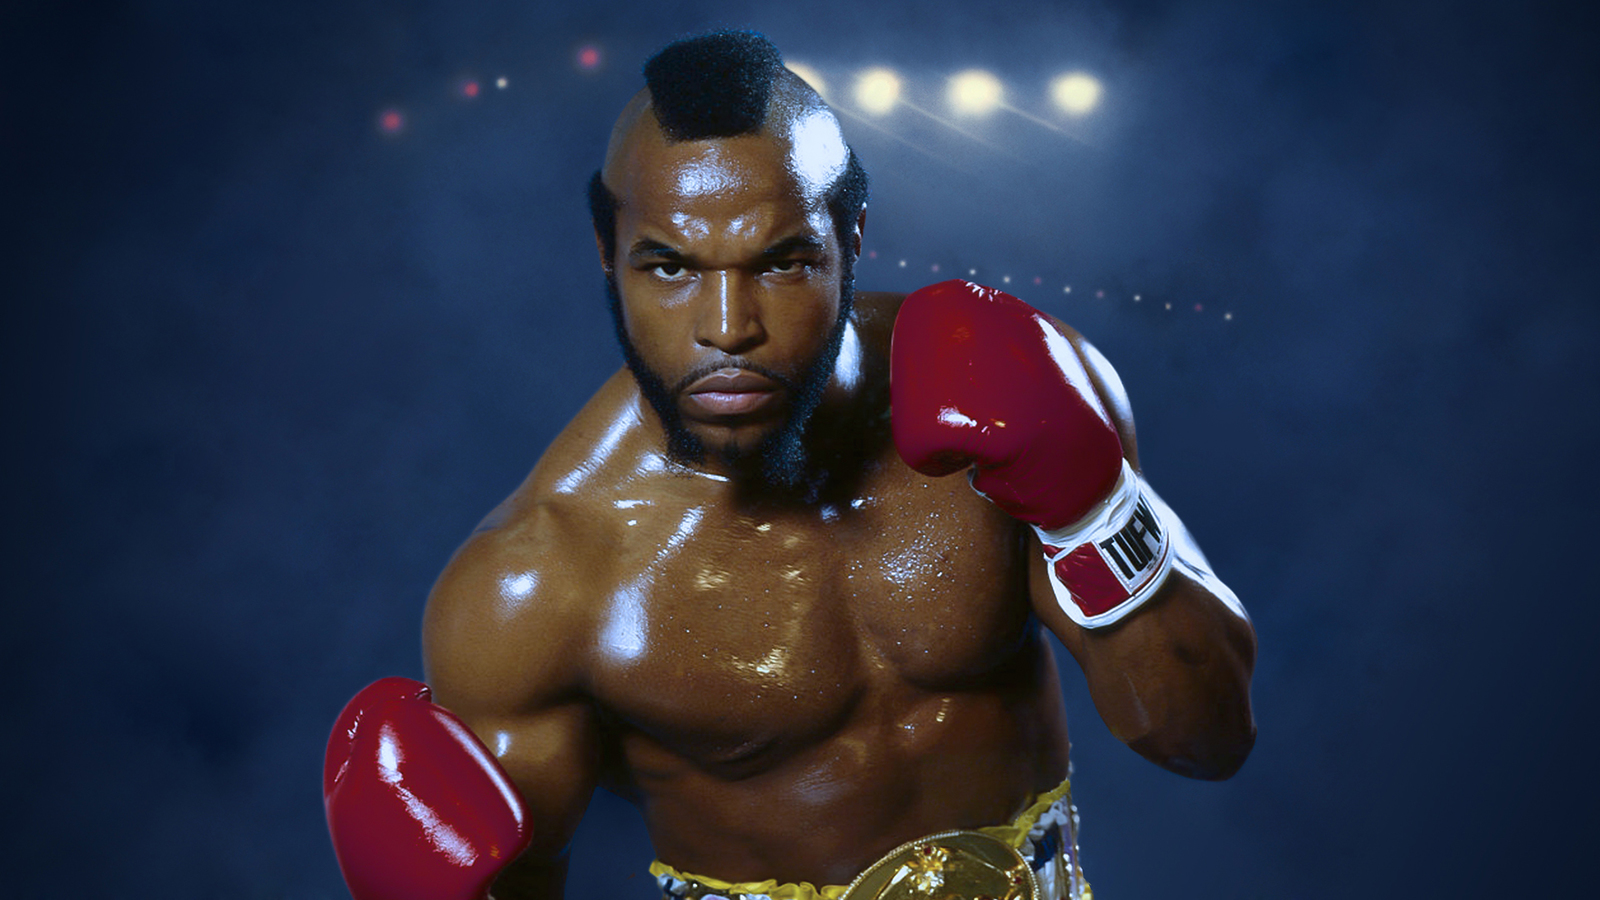 The bouncer king of the USA! Mr. T (info+video+photo) - Mr. Ti, Mike Tyson, Sylvester Stallone, Rocky, Nostalgia, Cinema, news, What, Video, Longpost